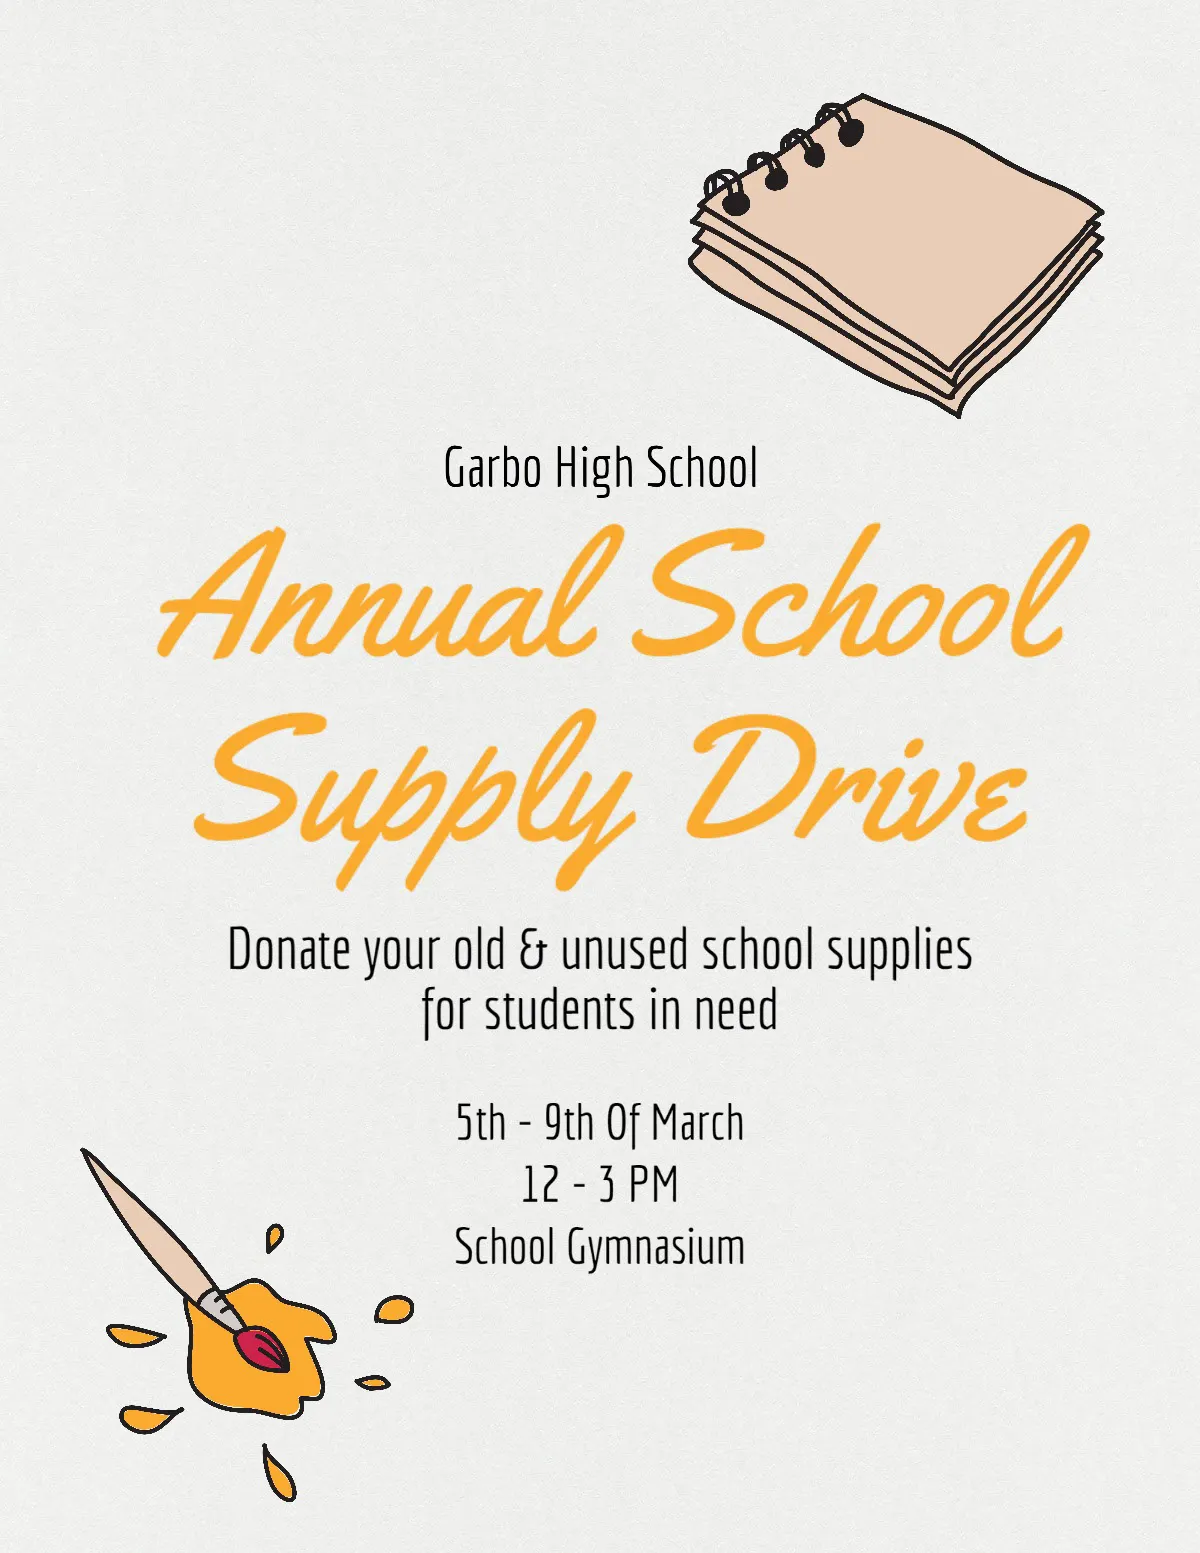 Yellow And White School Supplies Drive Flyer